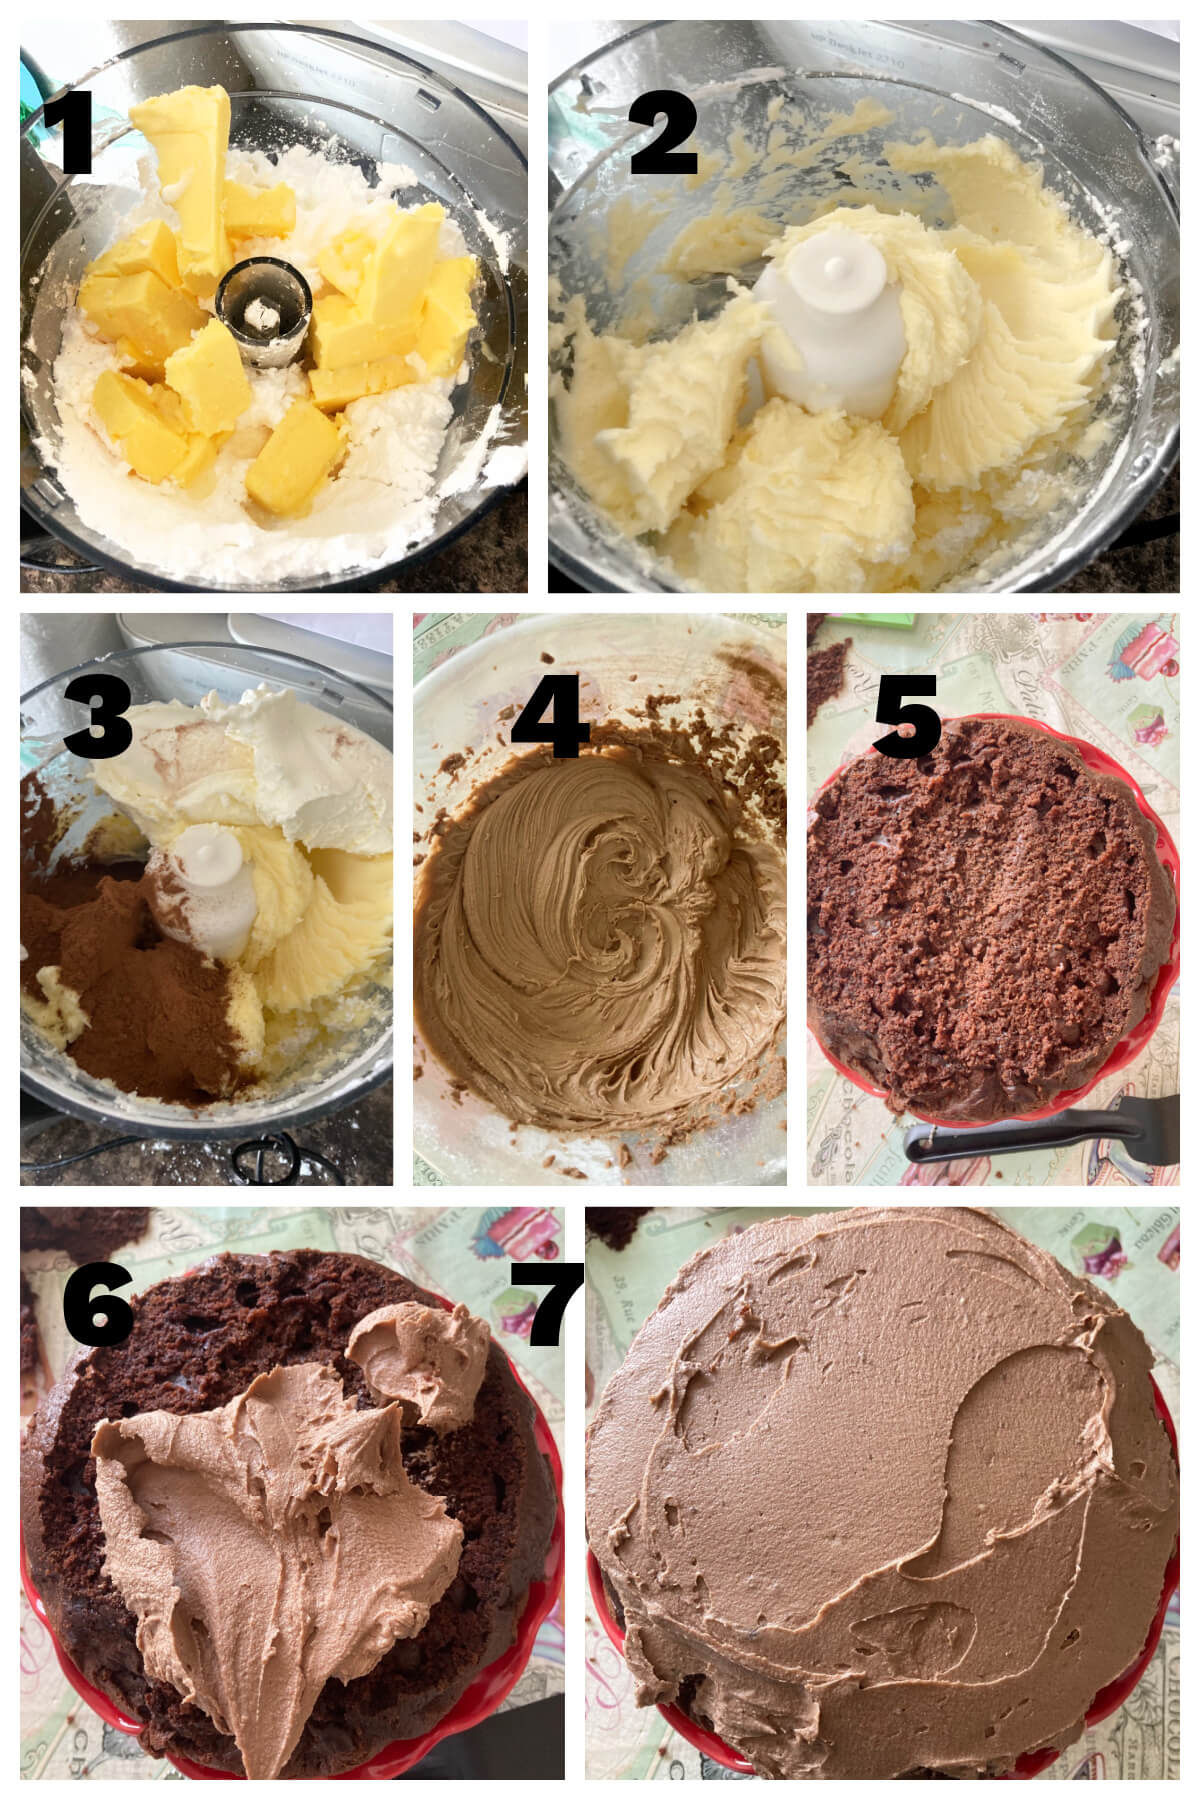 Collage of 7 photos to show how to make chocolate buttercream for a chocolate cake.